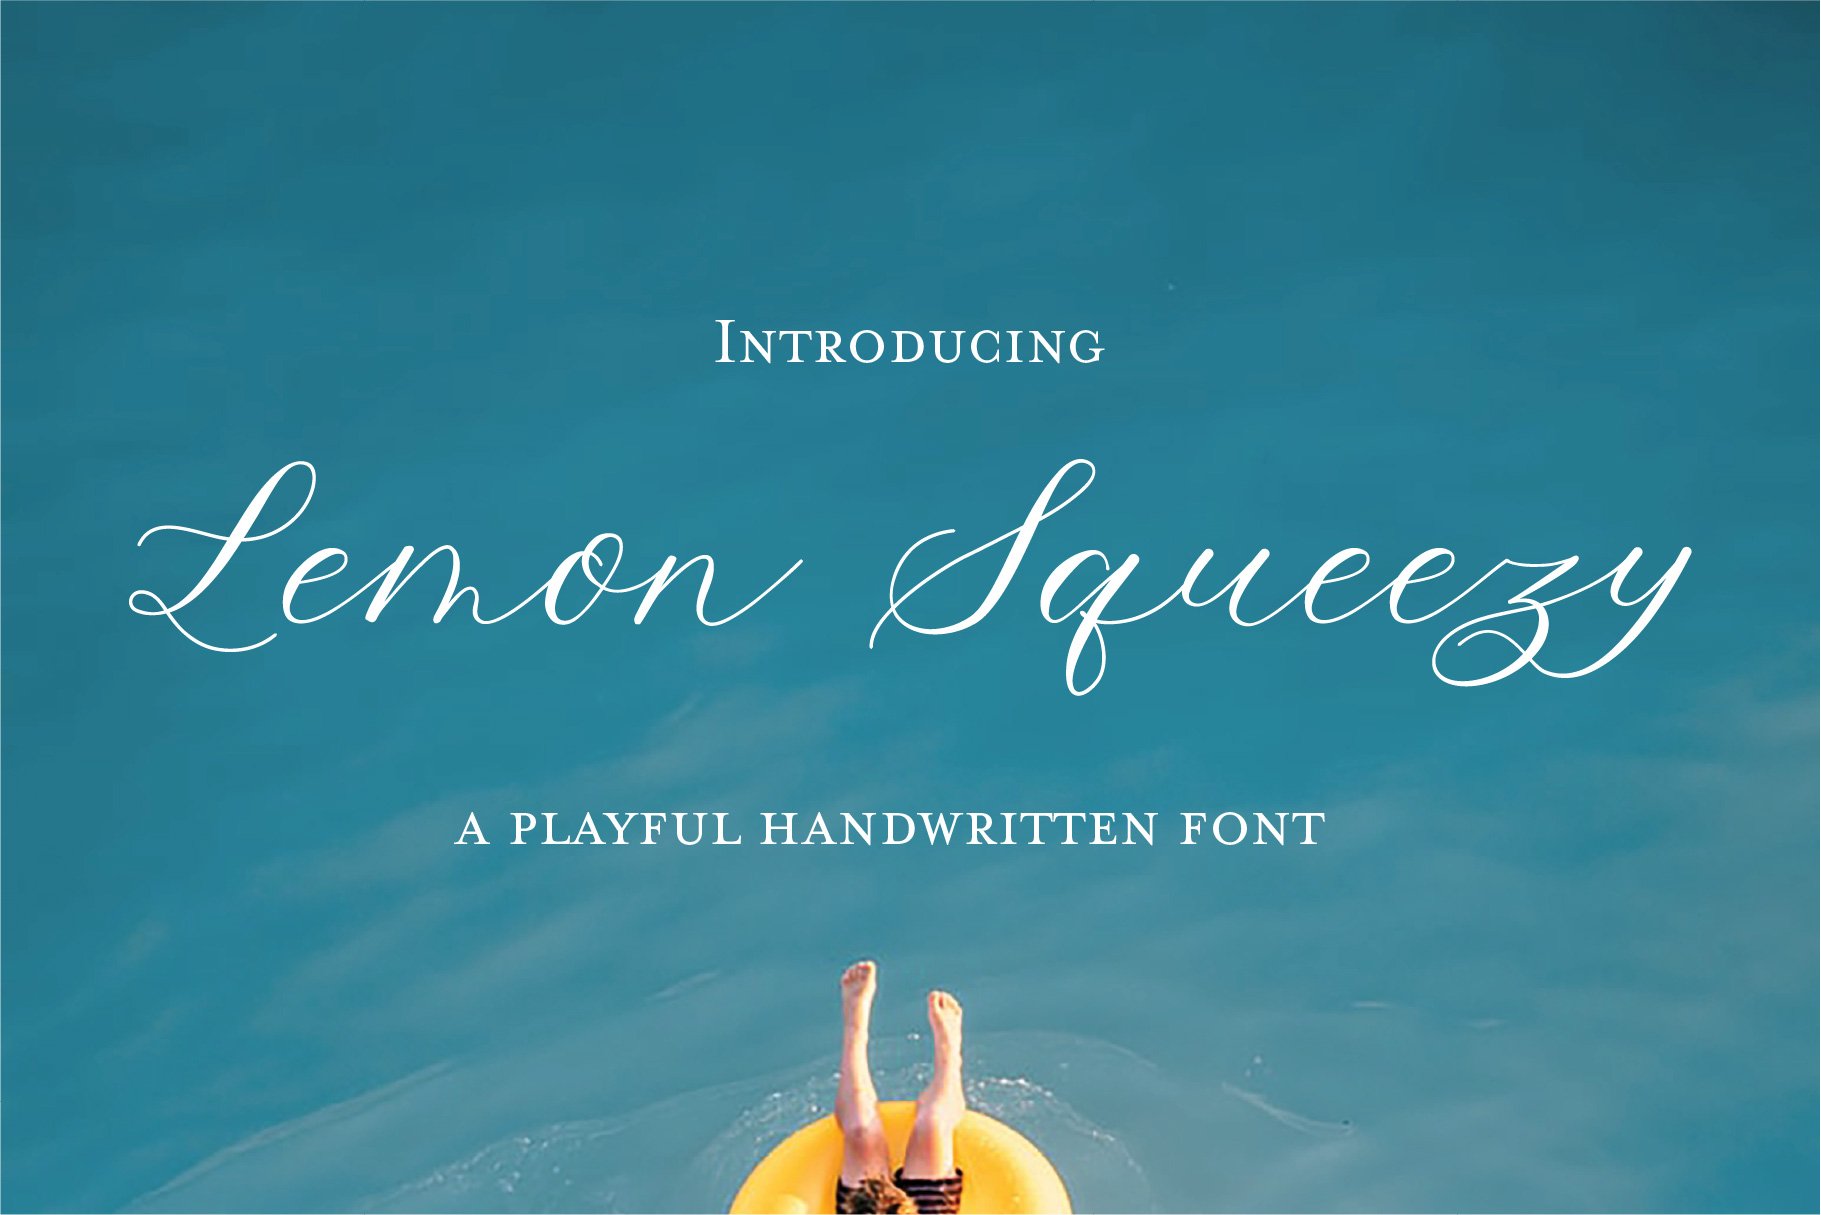 Lemon Squeezy Calligraphy Font cover image.